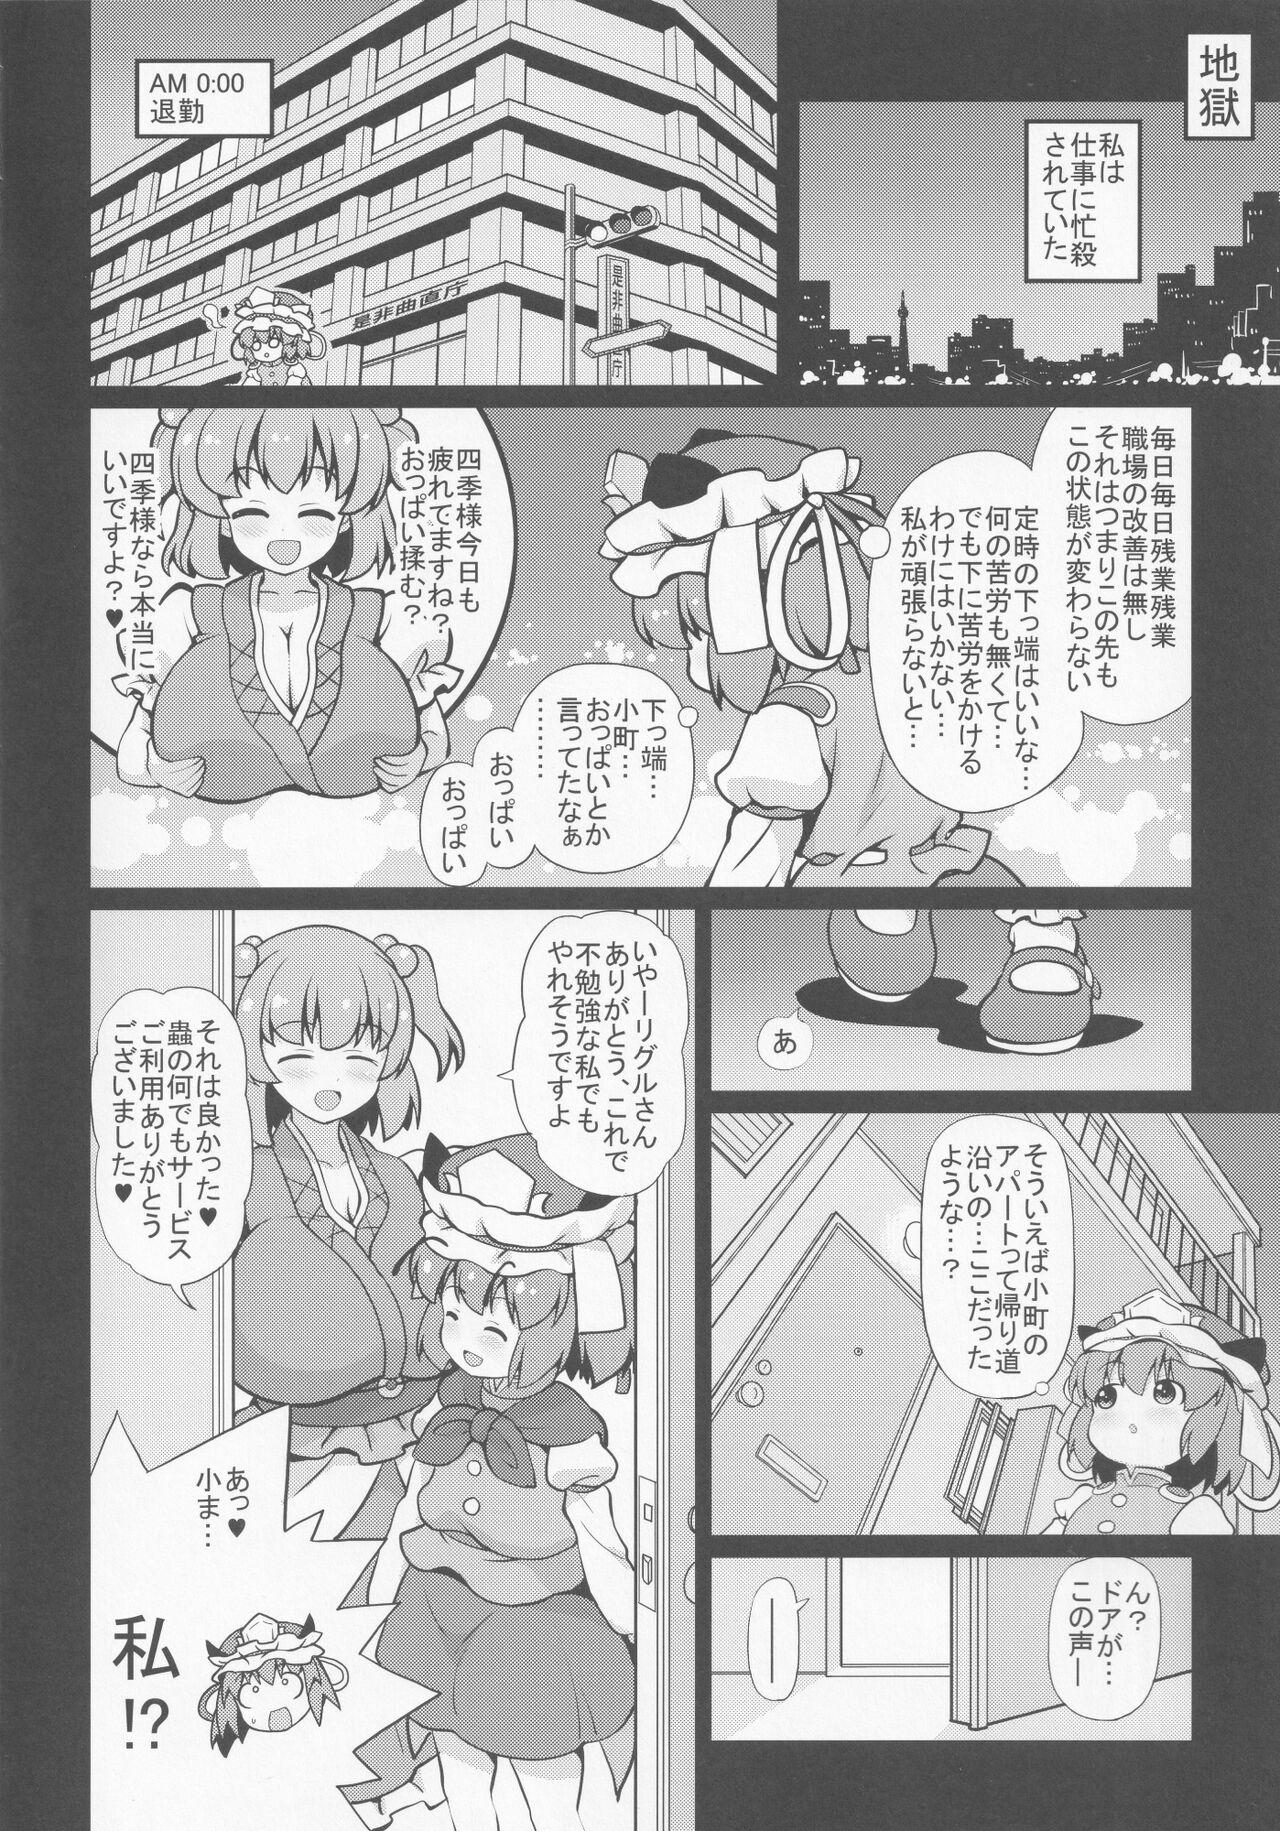 Livecams gray out - Touhou project Officesex - Page 5